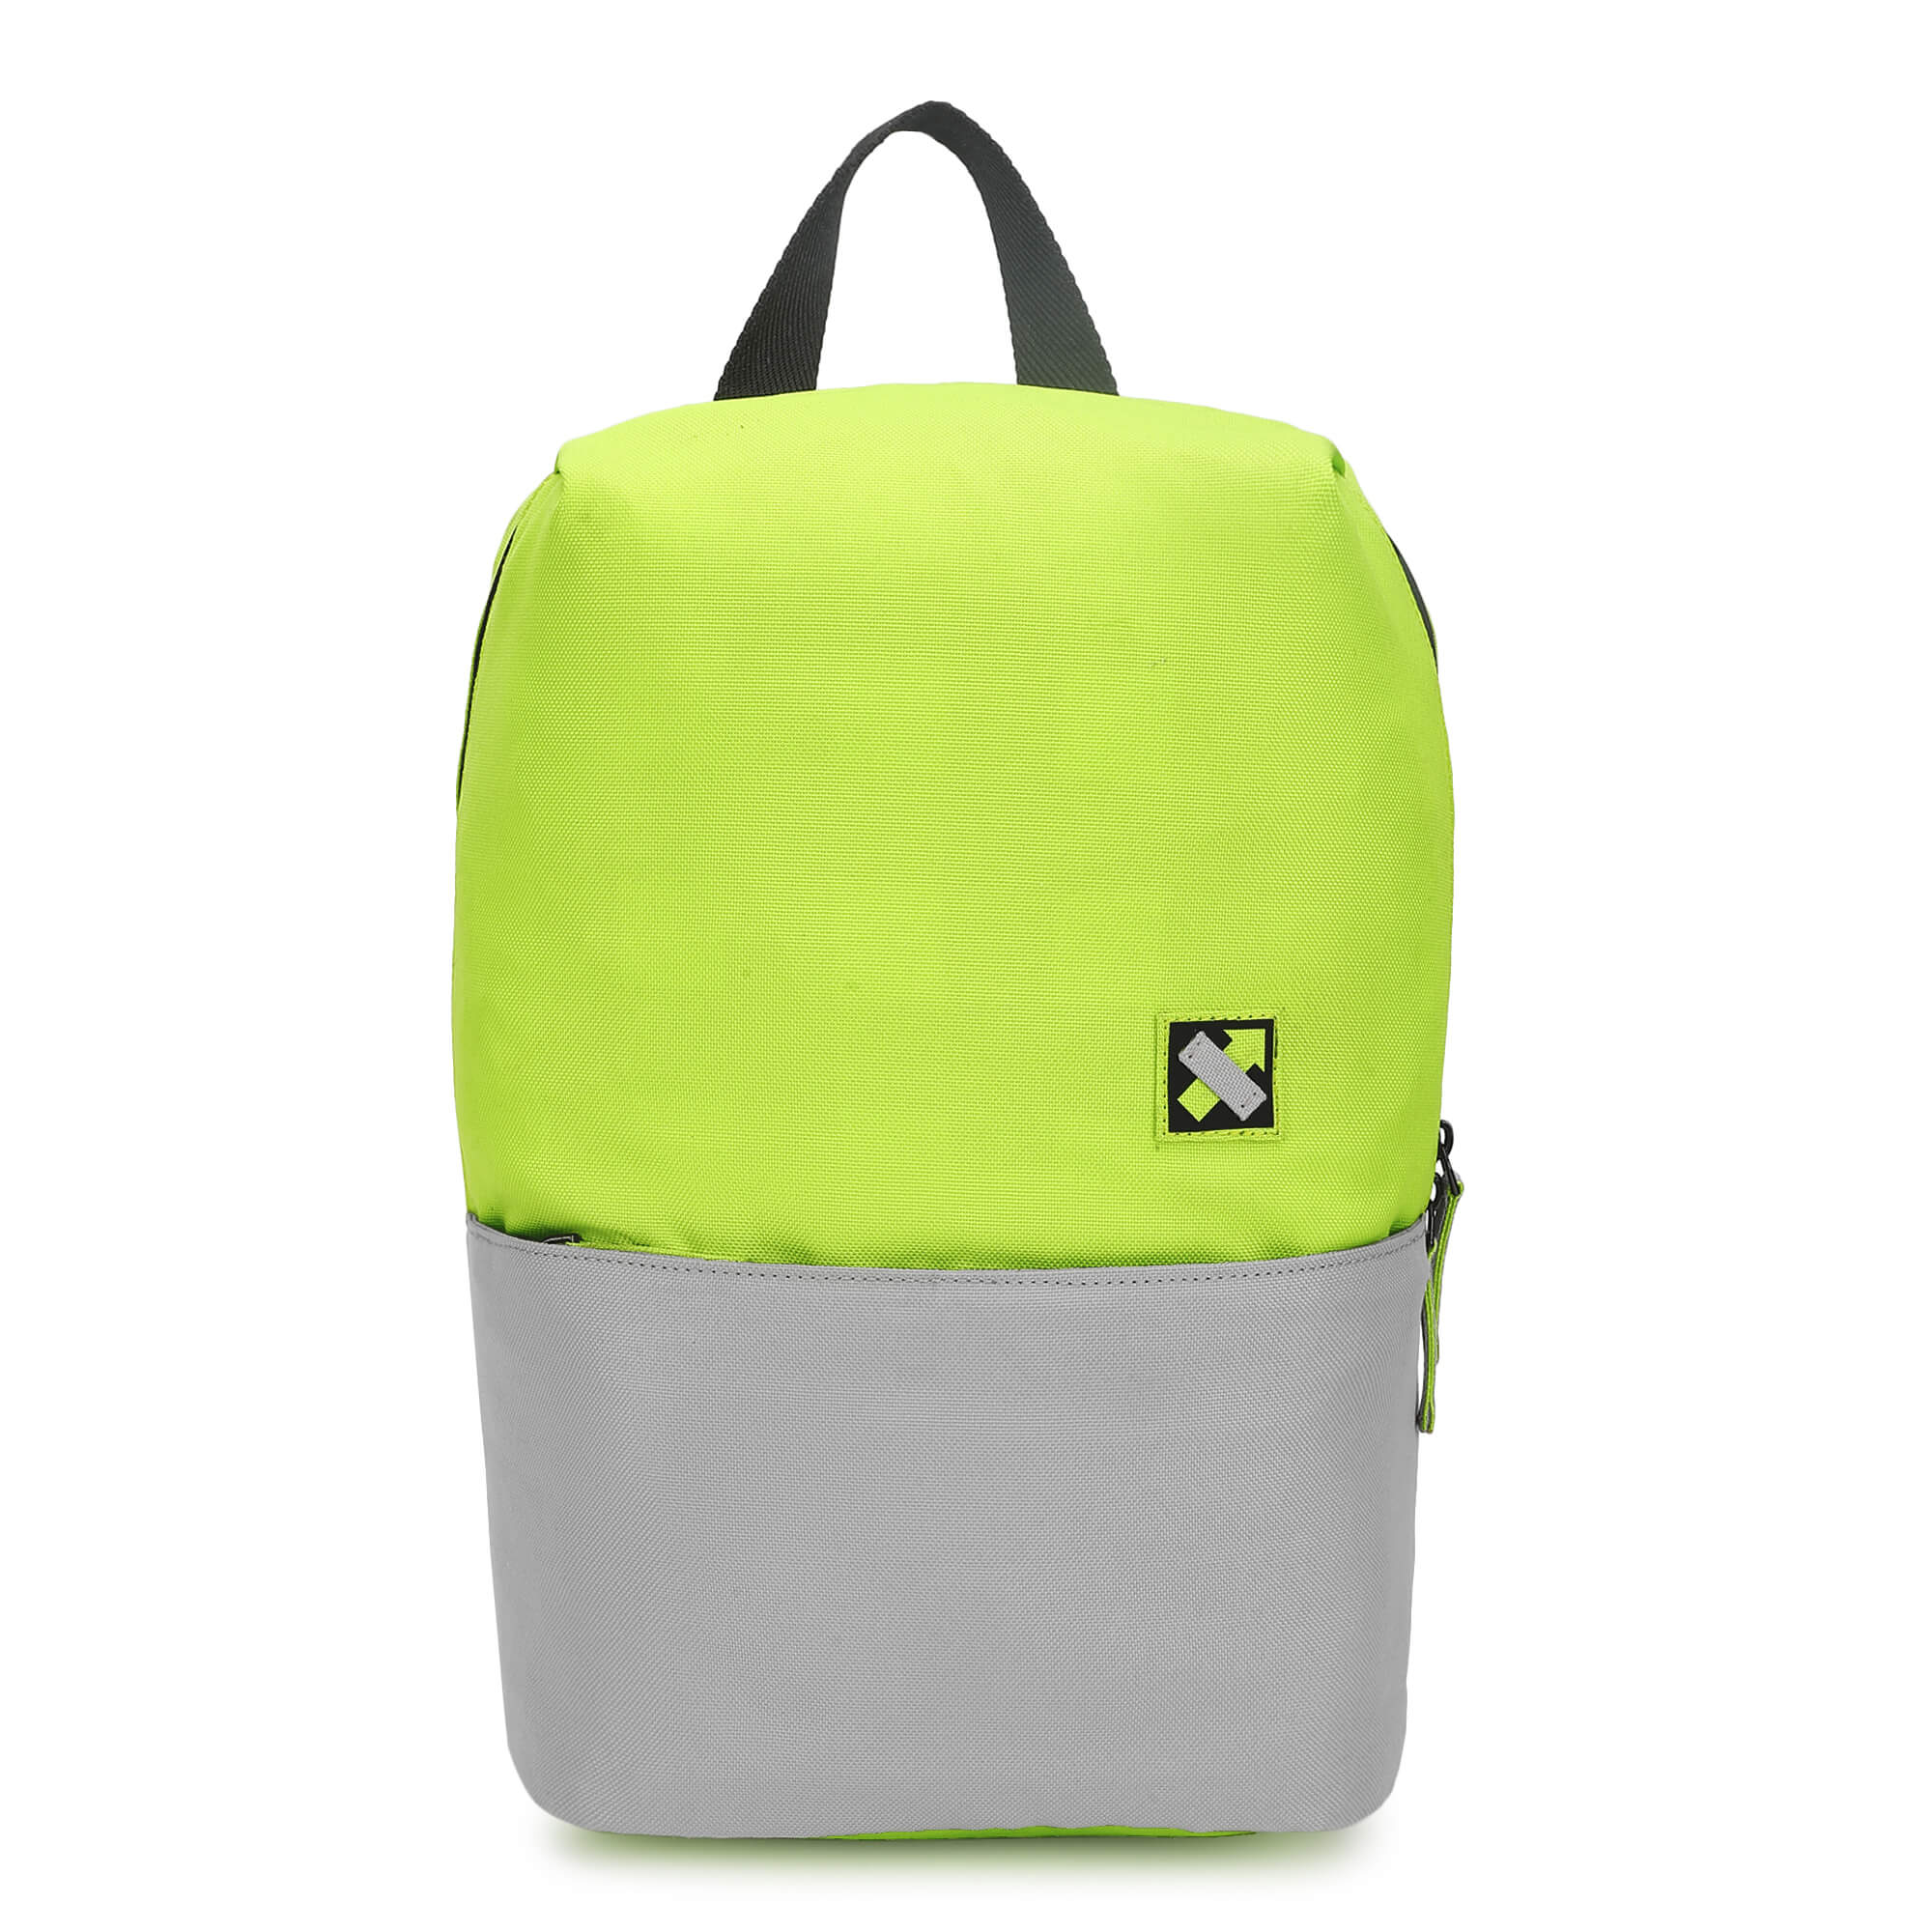 COLOURBLOCKED MICROQUEST 234.5 DAYPACK